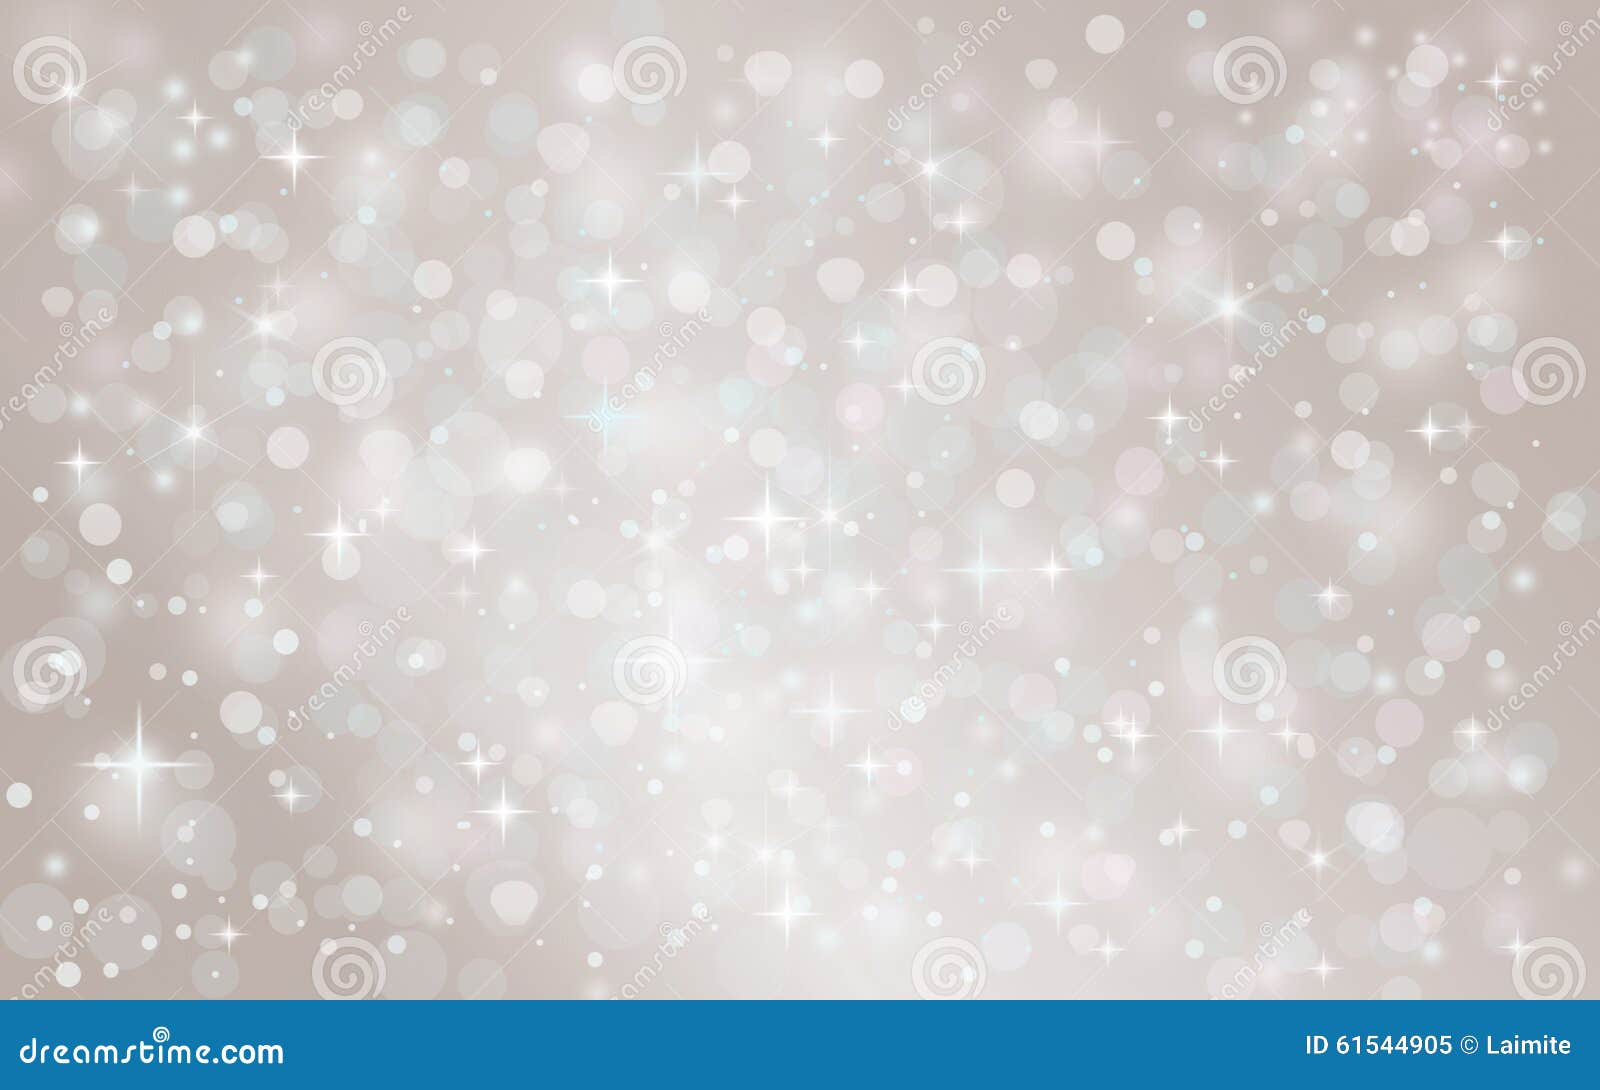 silver abstract snow falling winter christmas holiday background